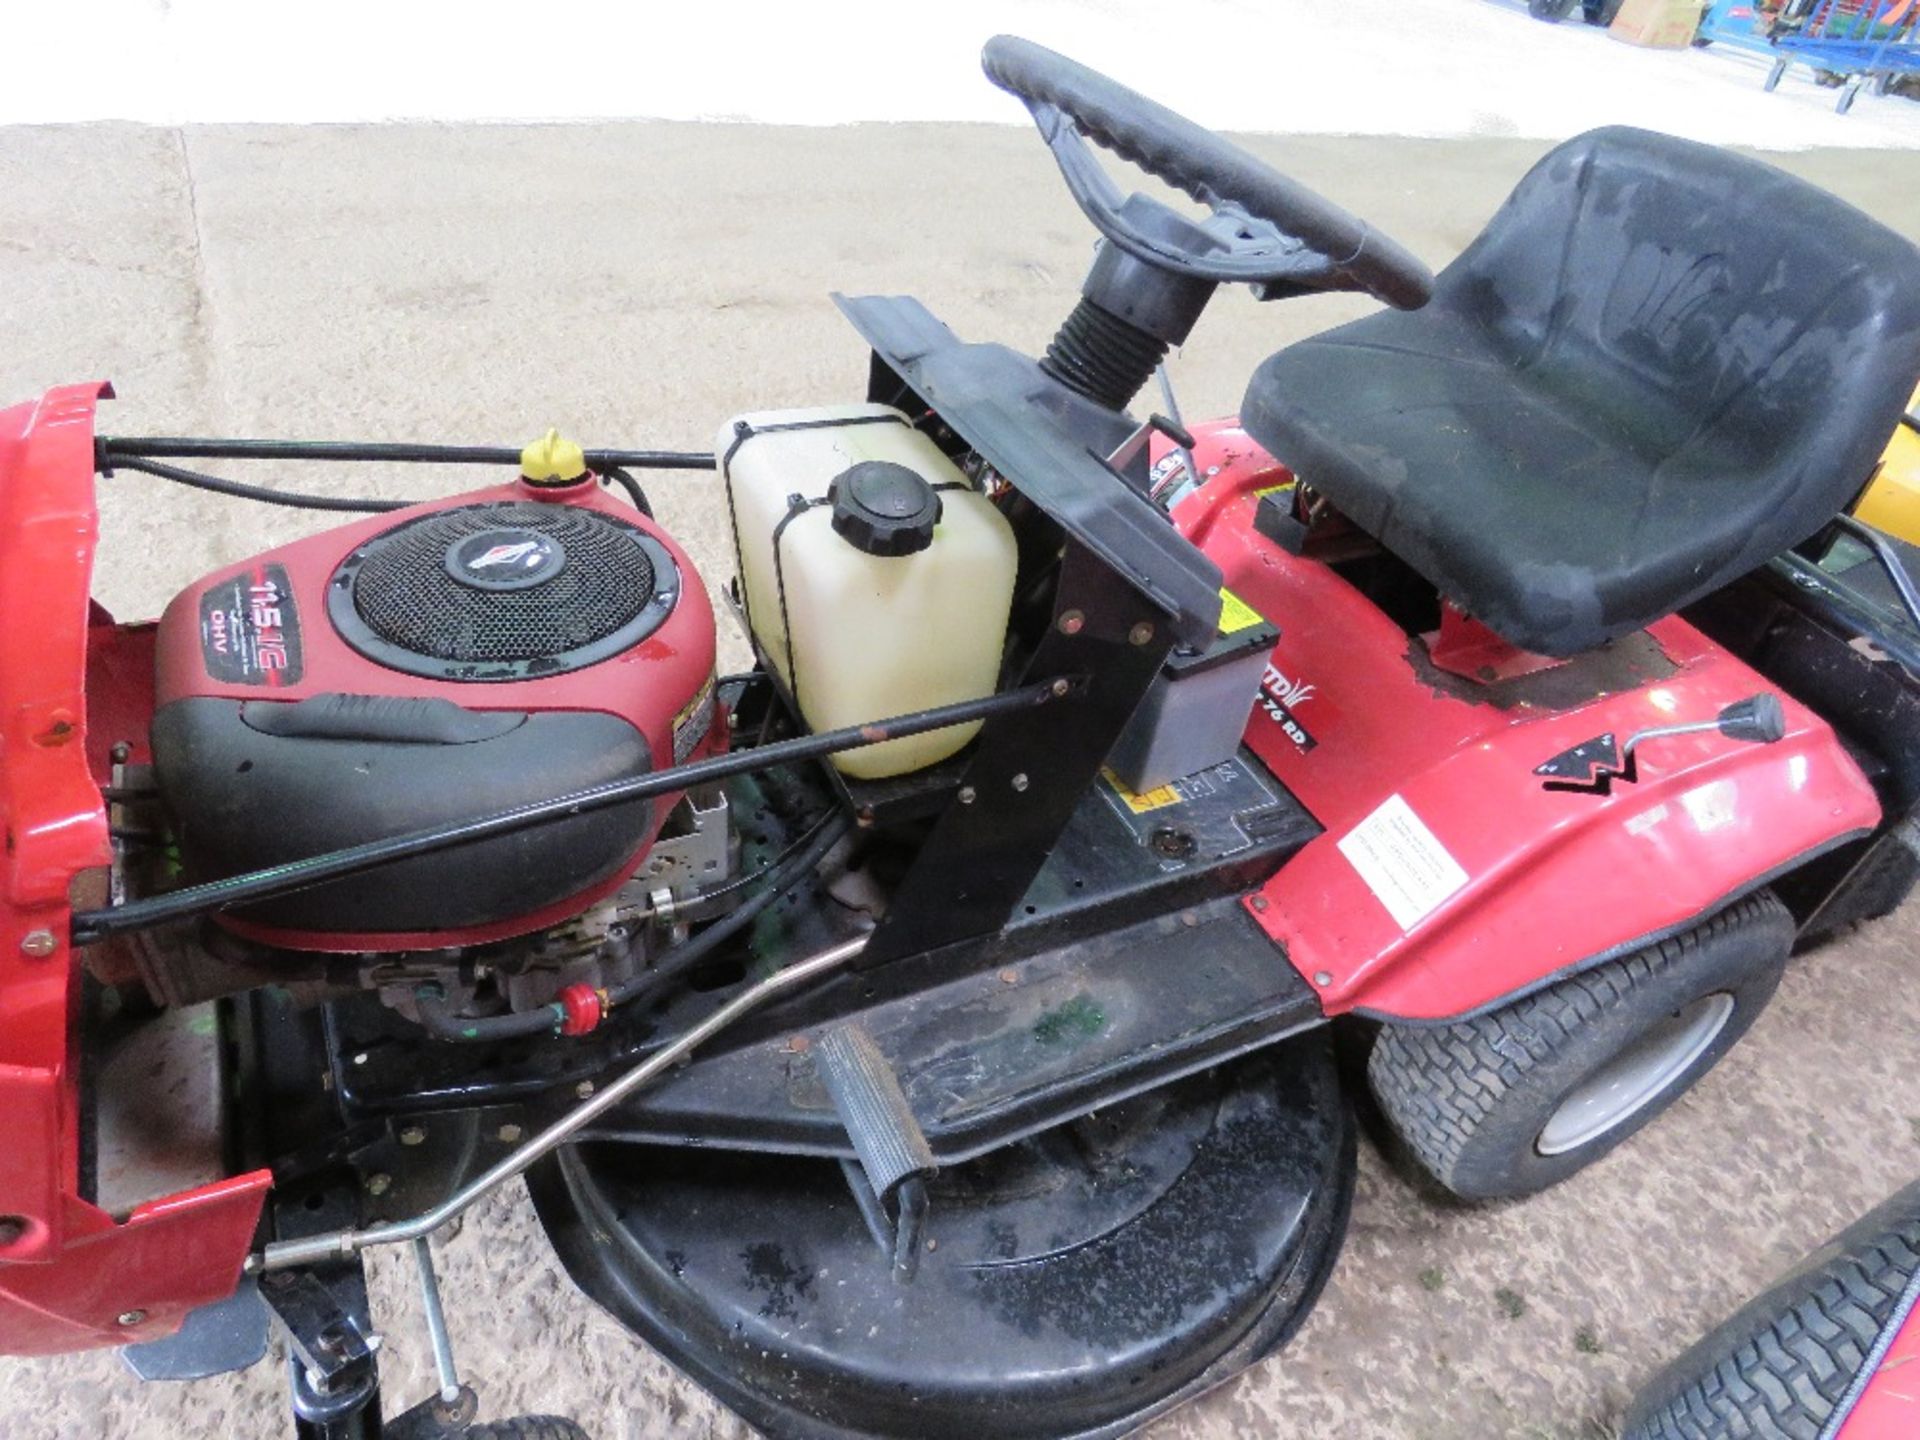 MTD SPIDER 76RD RIDER RIDE ON MOWER WITH COLLECTOR. WHEN BRIEFLY TESTED WAS SEEN TO RUN, DRIVE AND M - Image 10 of 10